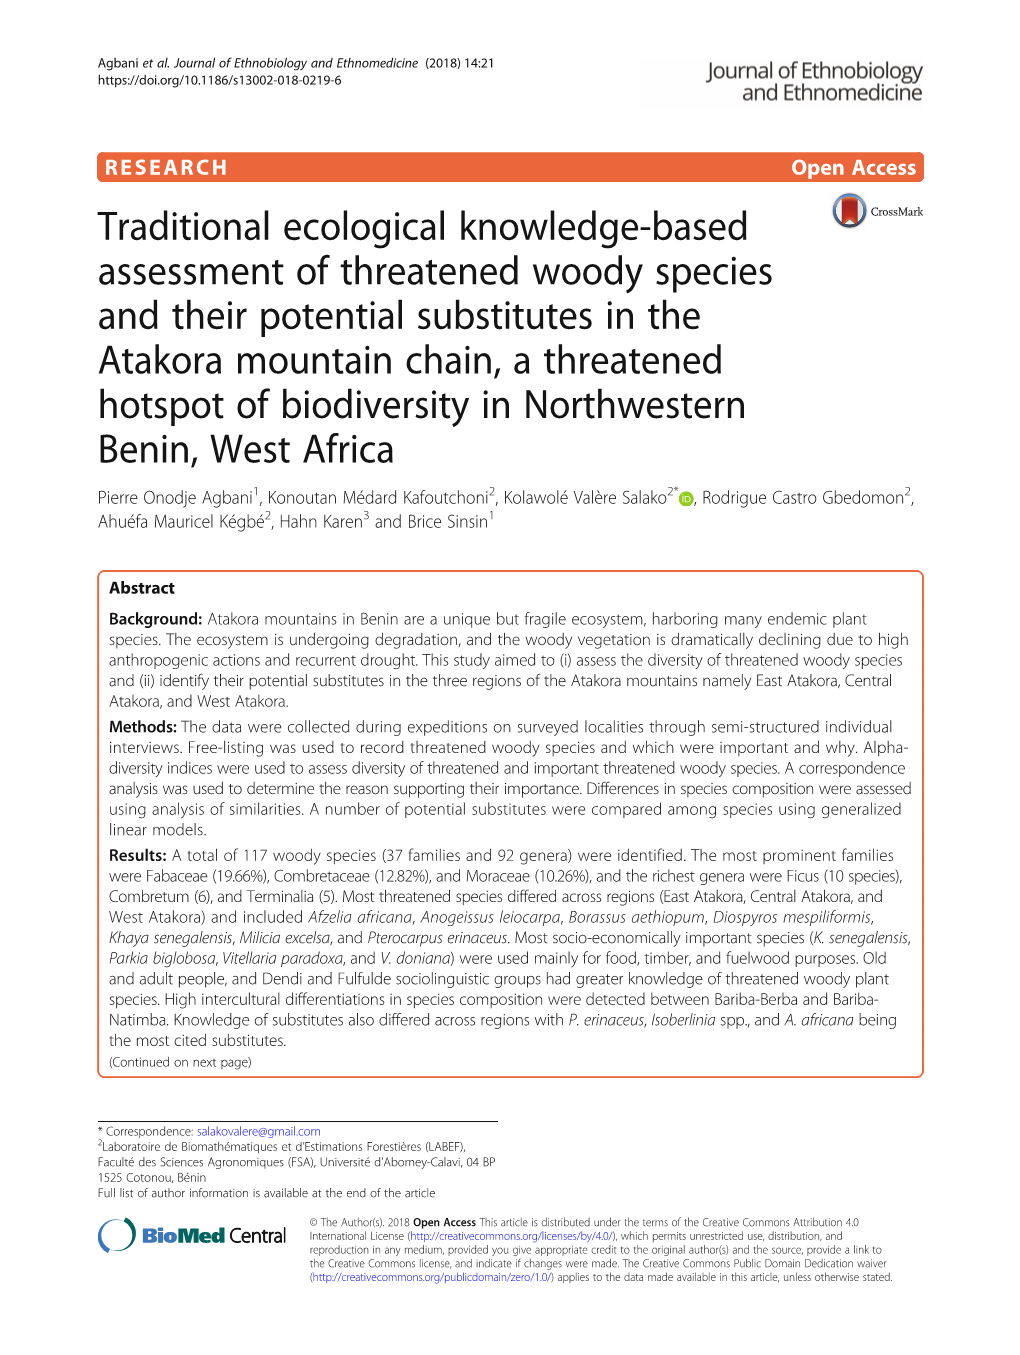 Traditional Ecological Knowledge-Based Assessment Of